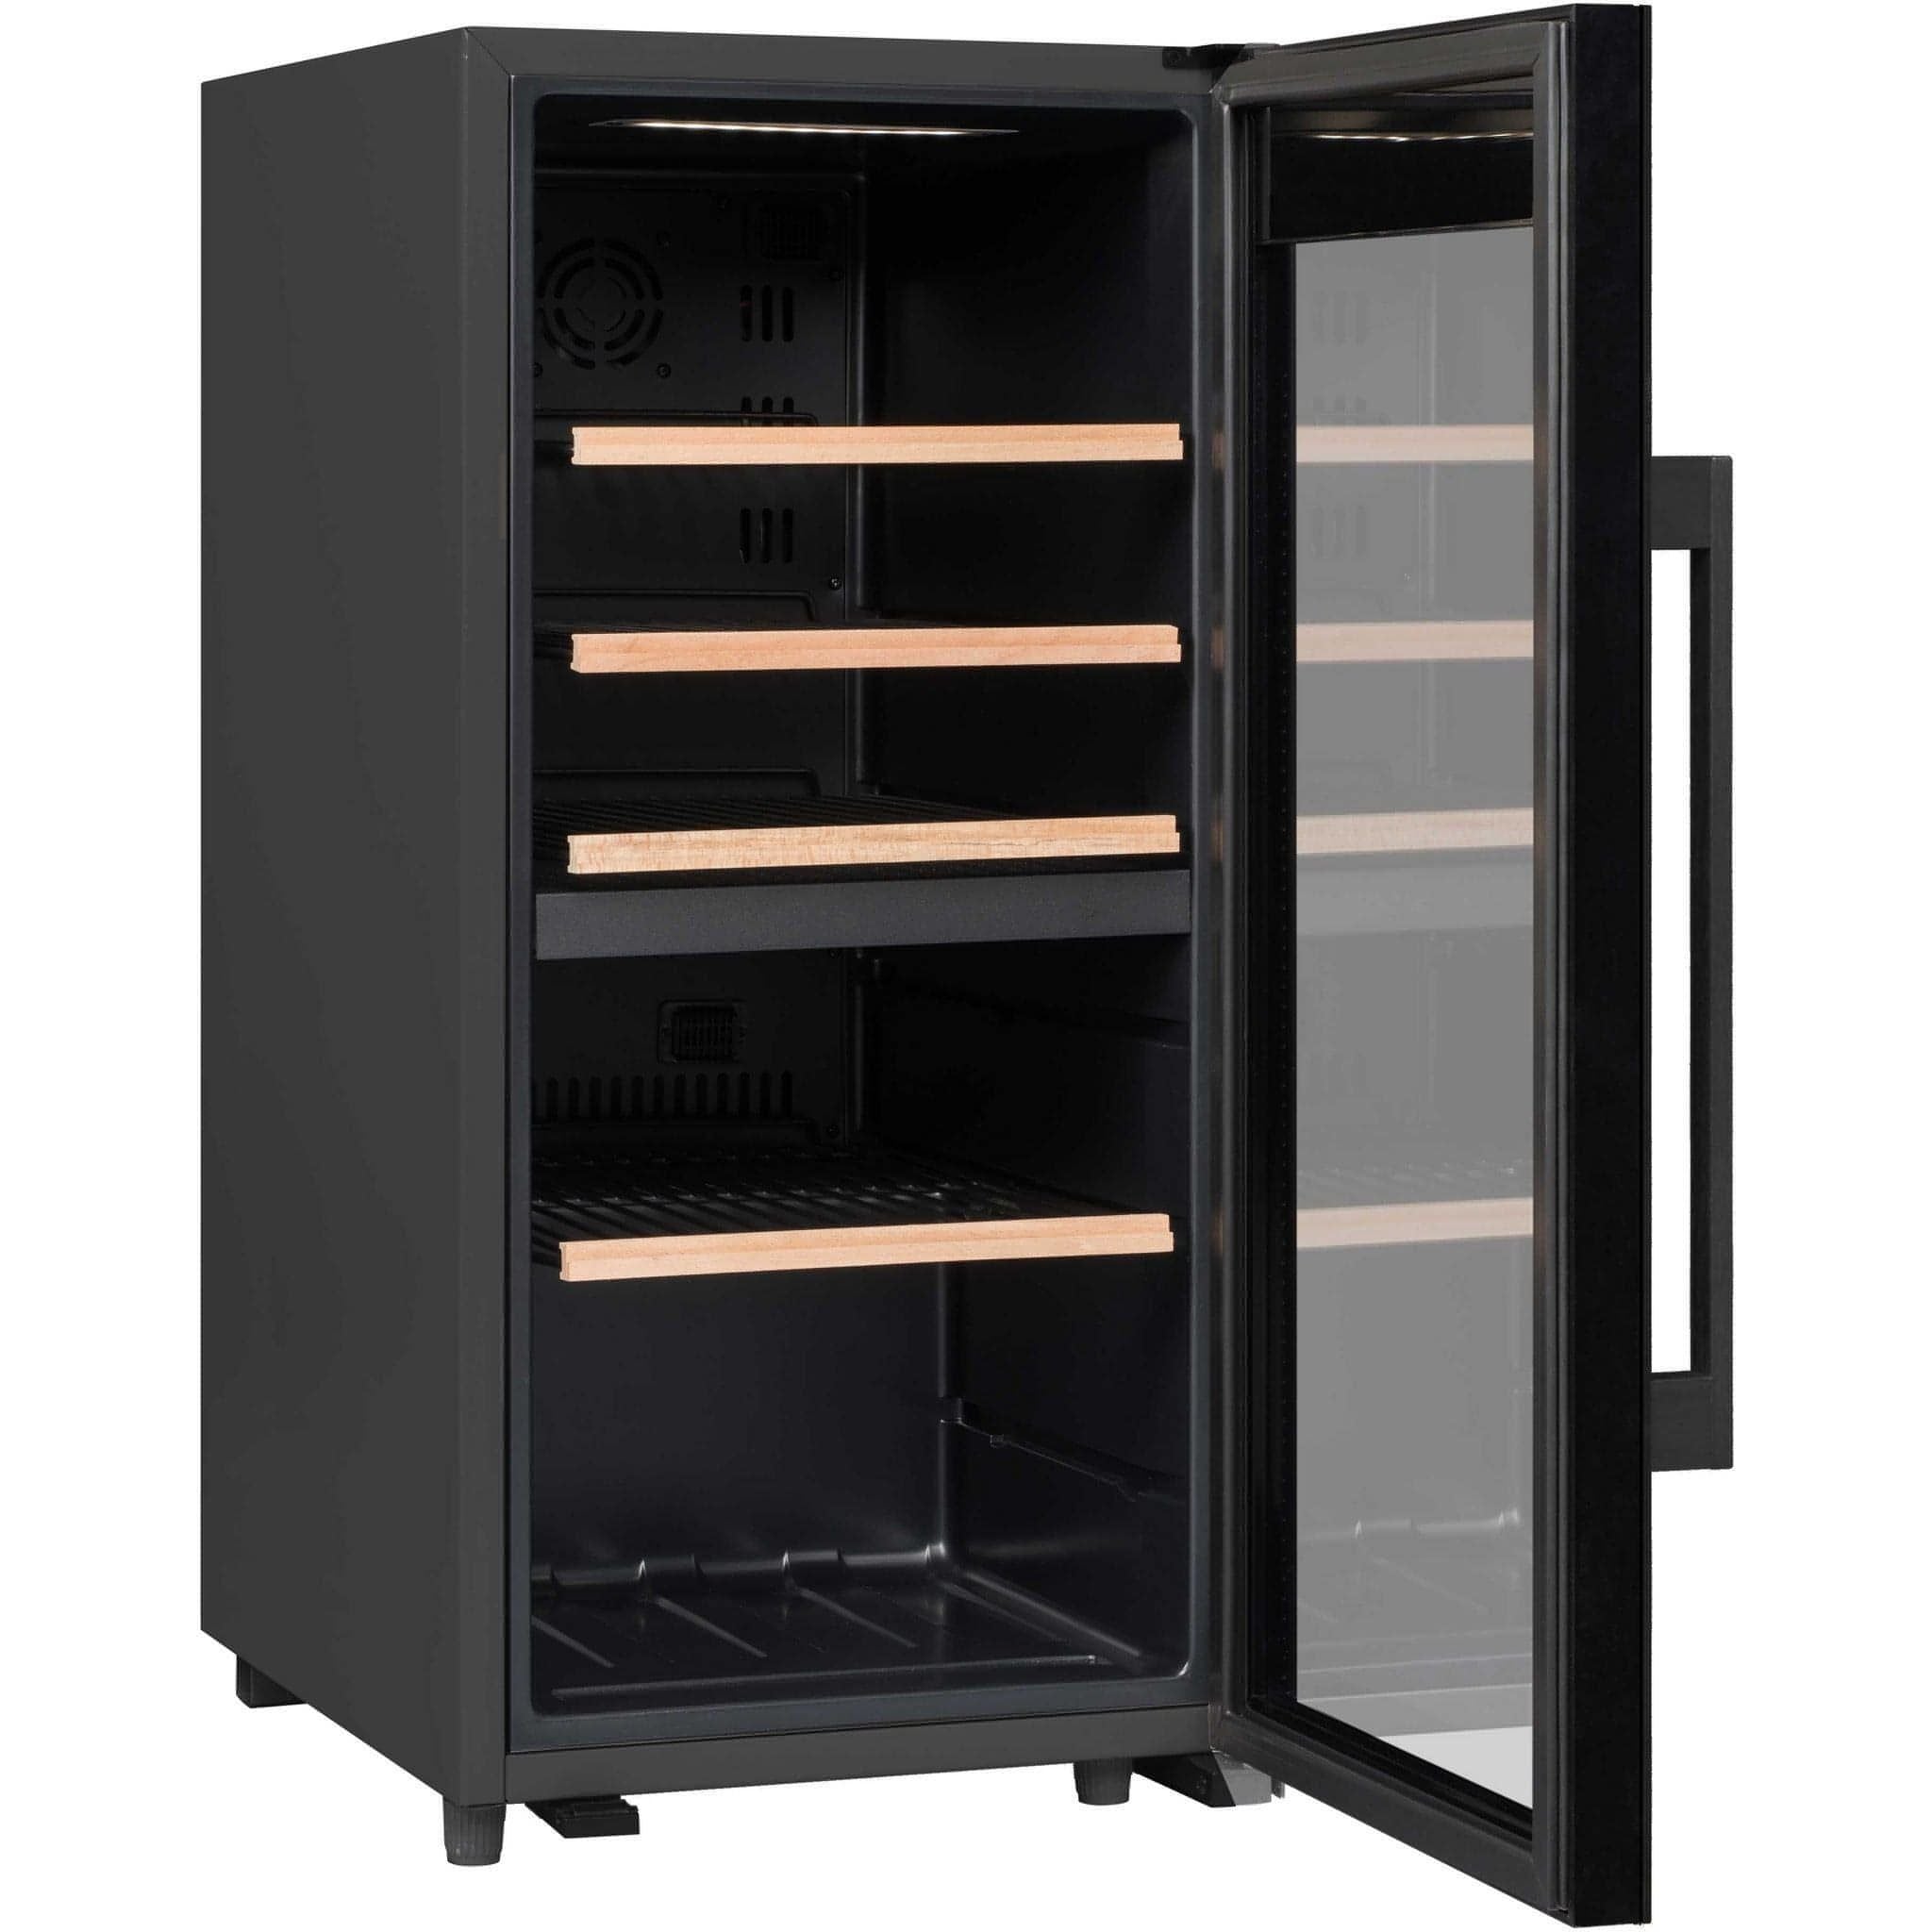 Climadiff - Dual Zone - 41 Bottle - Freestanding Wine Cooler CLD40B1